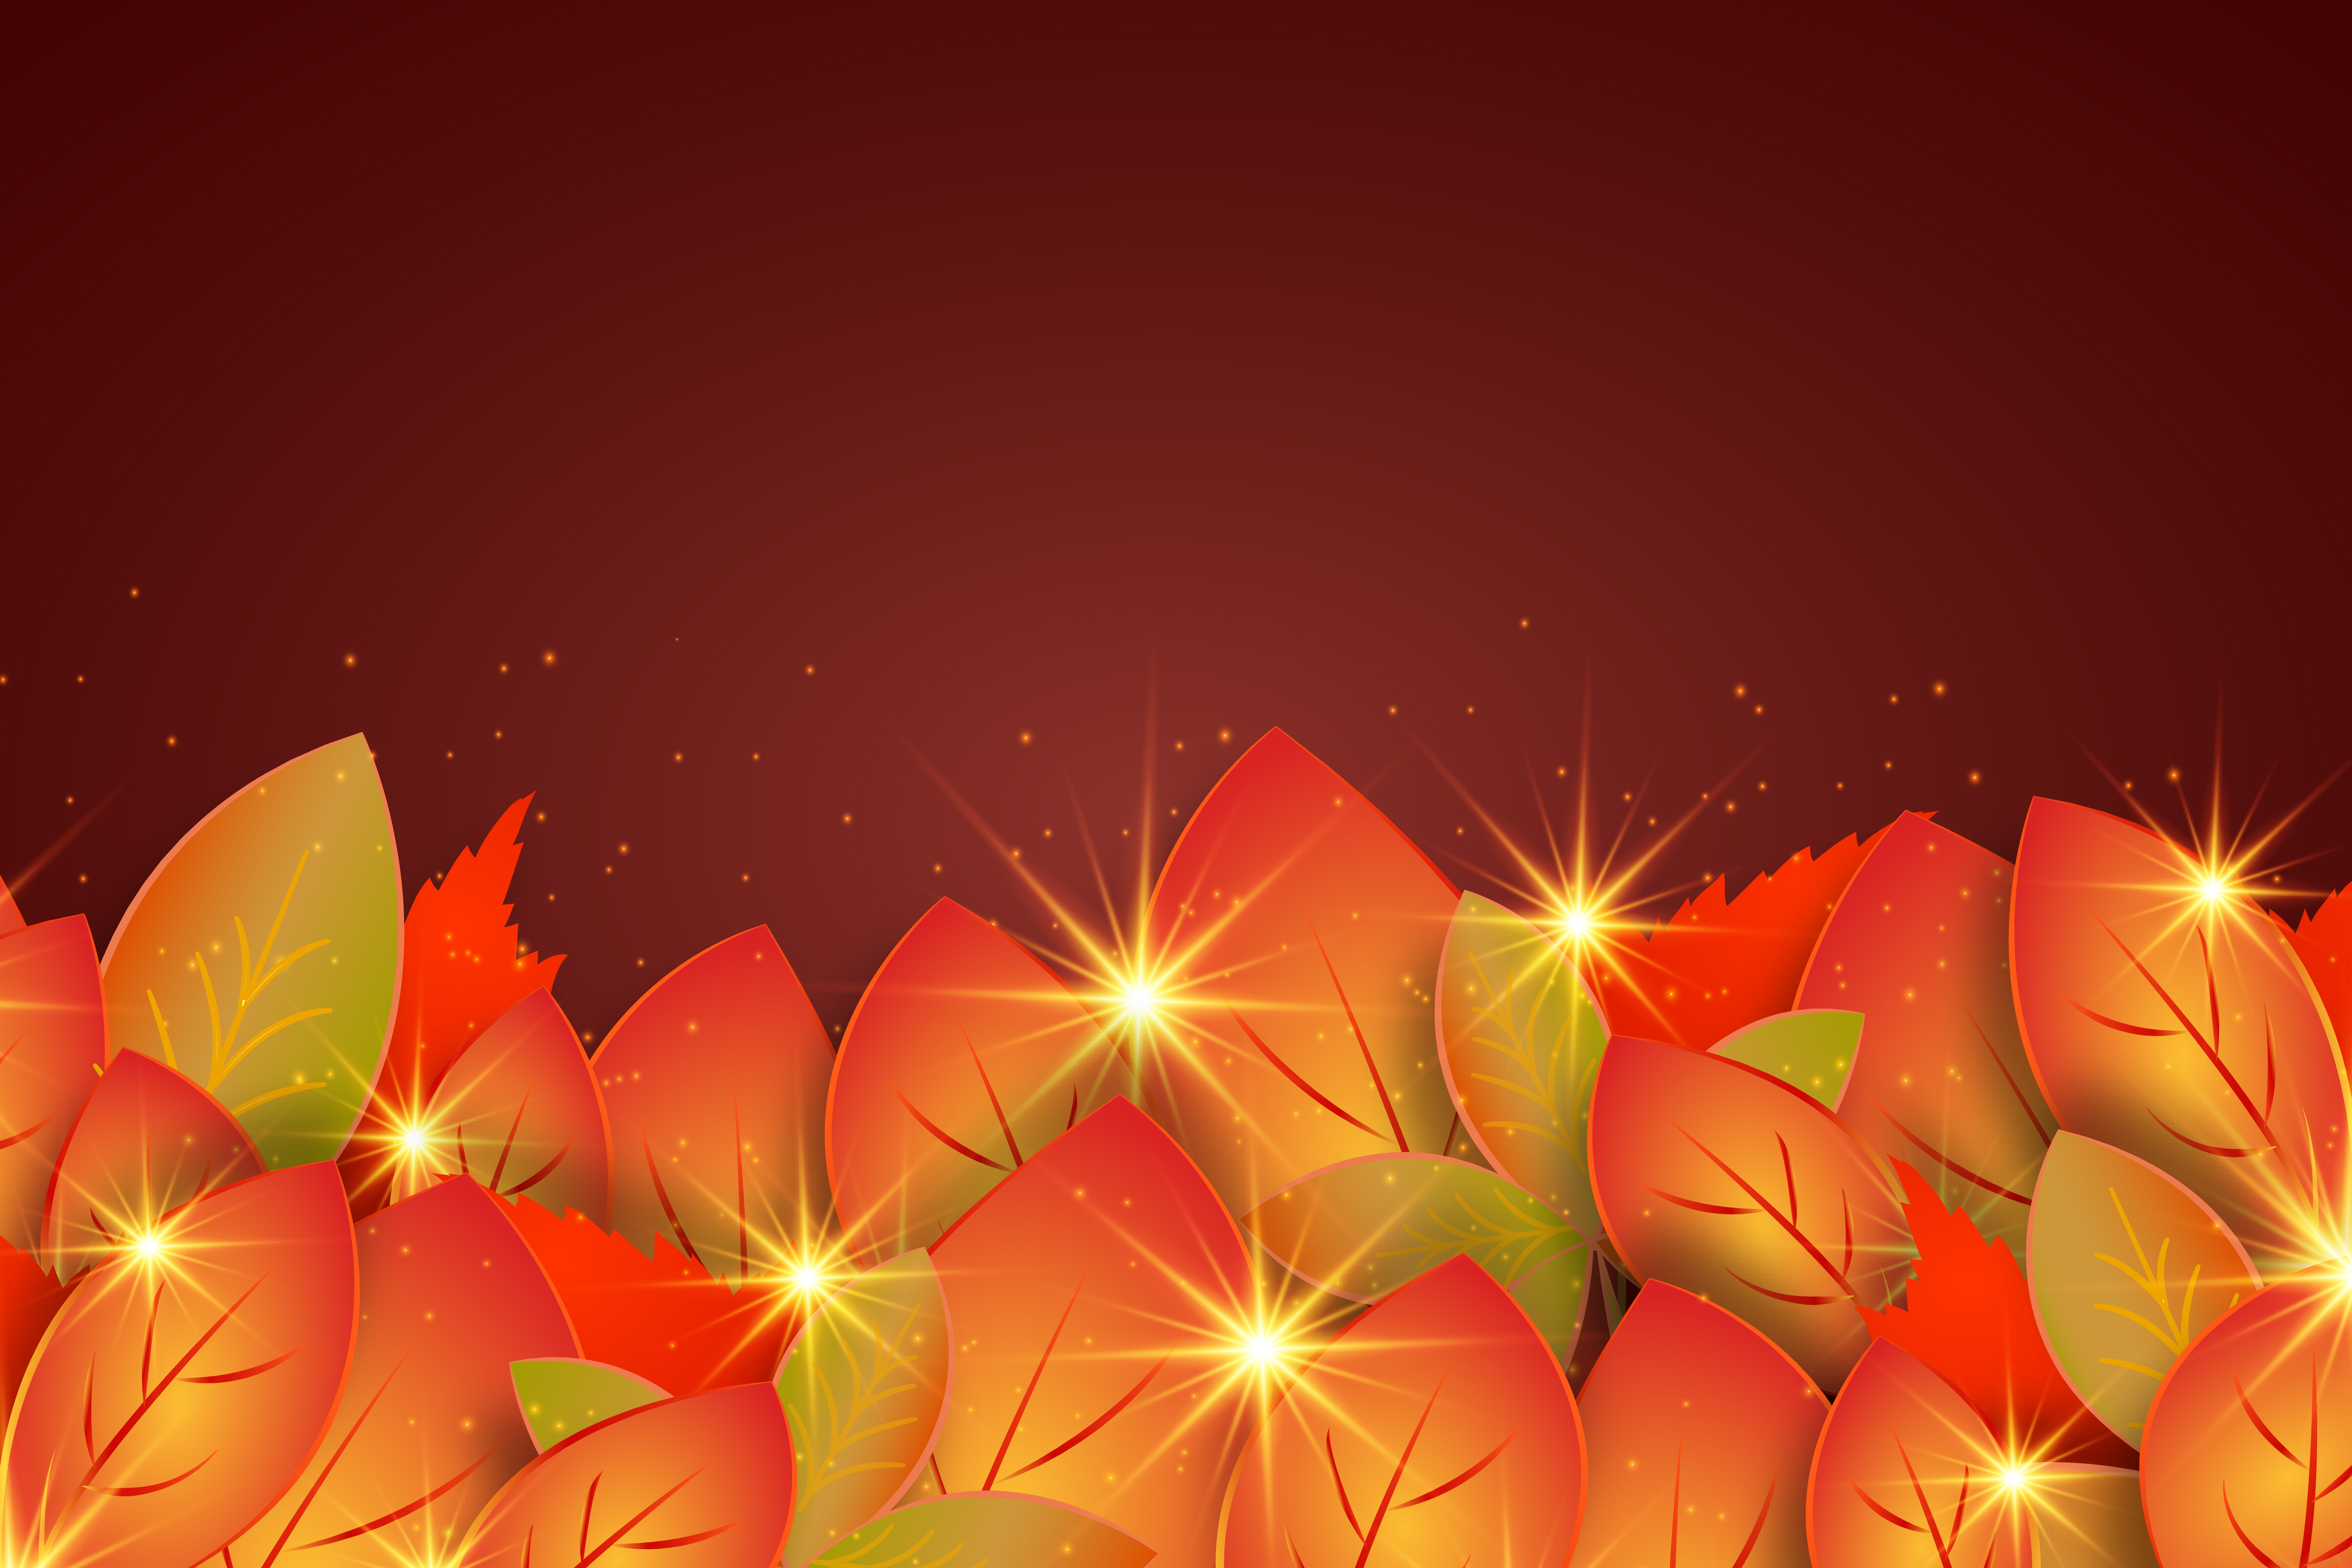 Free Image, thanksgiving, greetings, autumn, greeting, season, decoration, holiday, color, brown, fall, design, decorative, copyspace, celebration, leaves, happy, frame, background, ornament, sale, offer, banner, leaf, yellow, sky, flower, computer